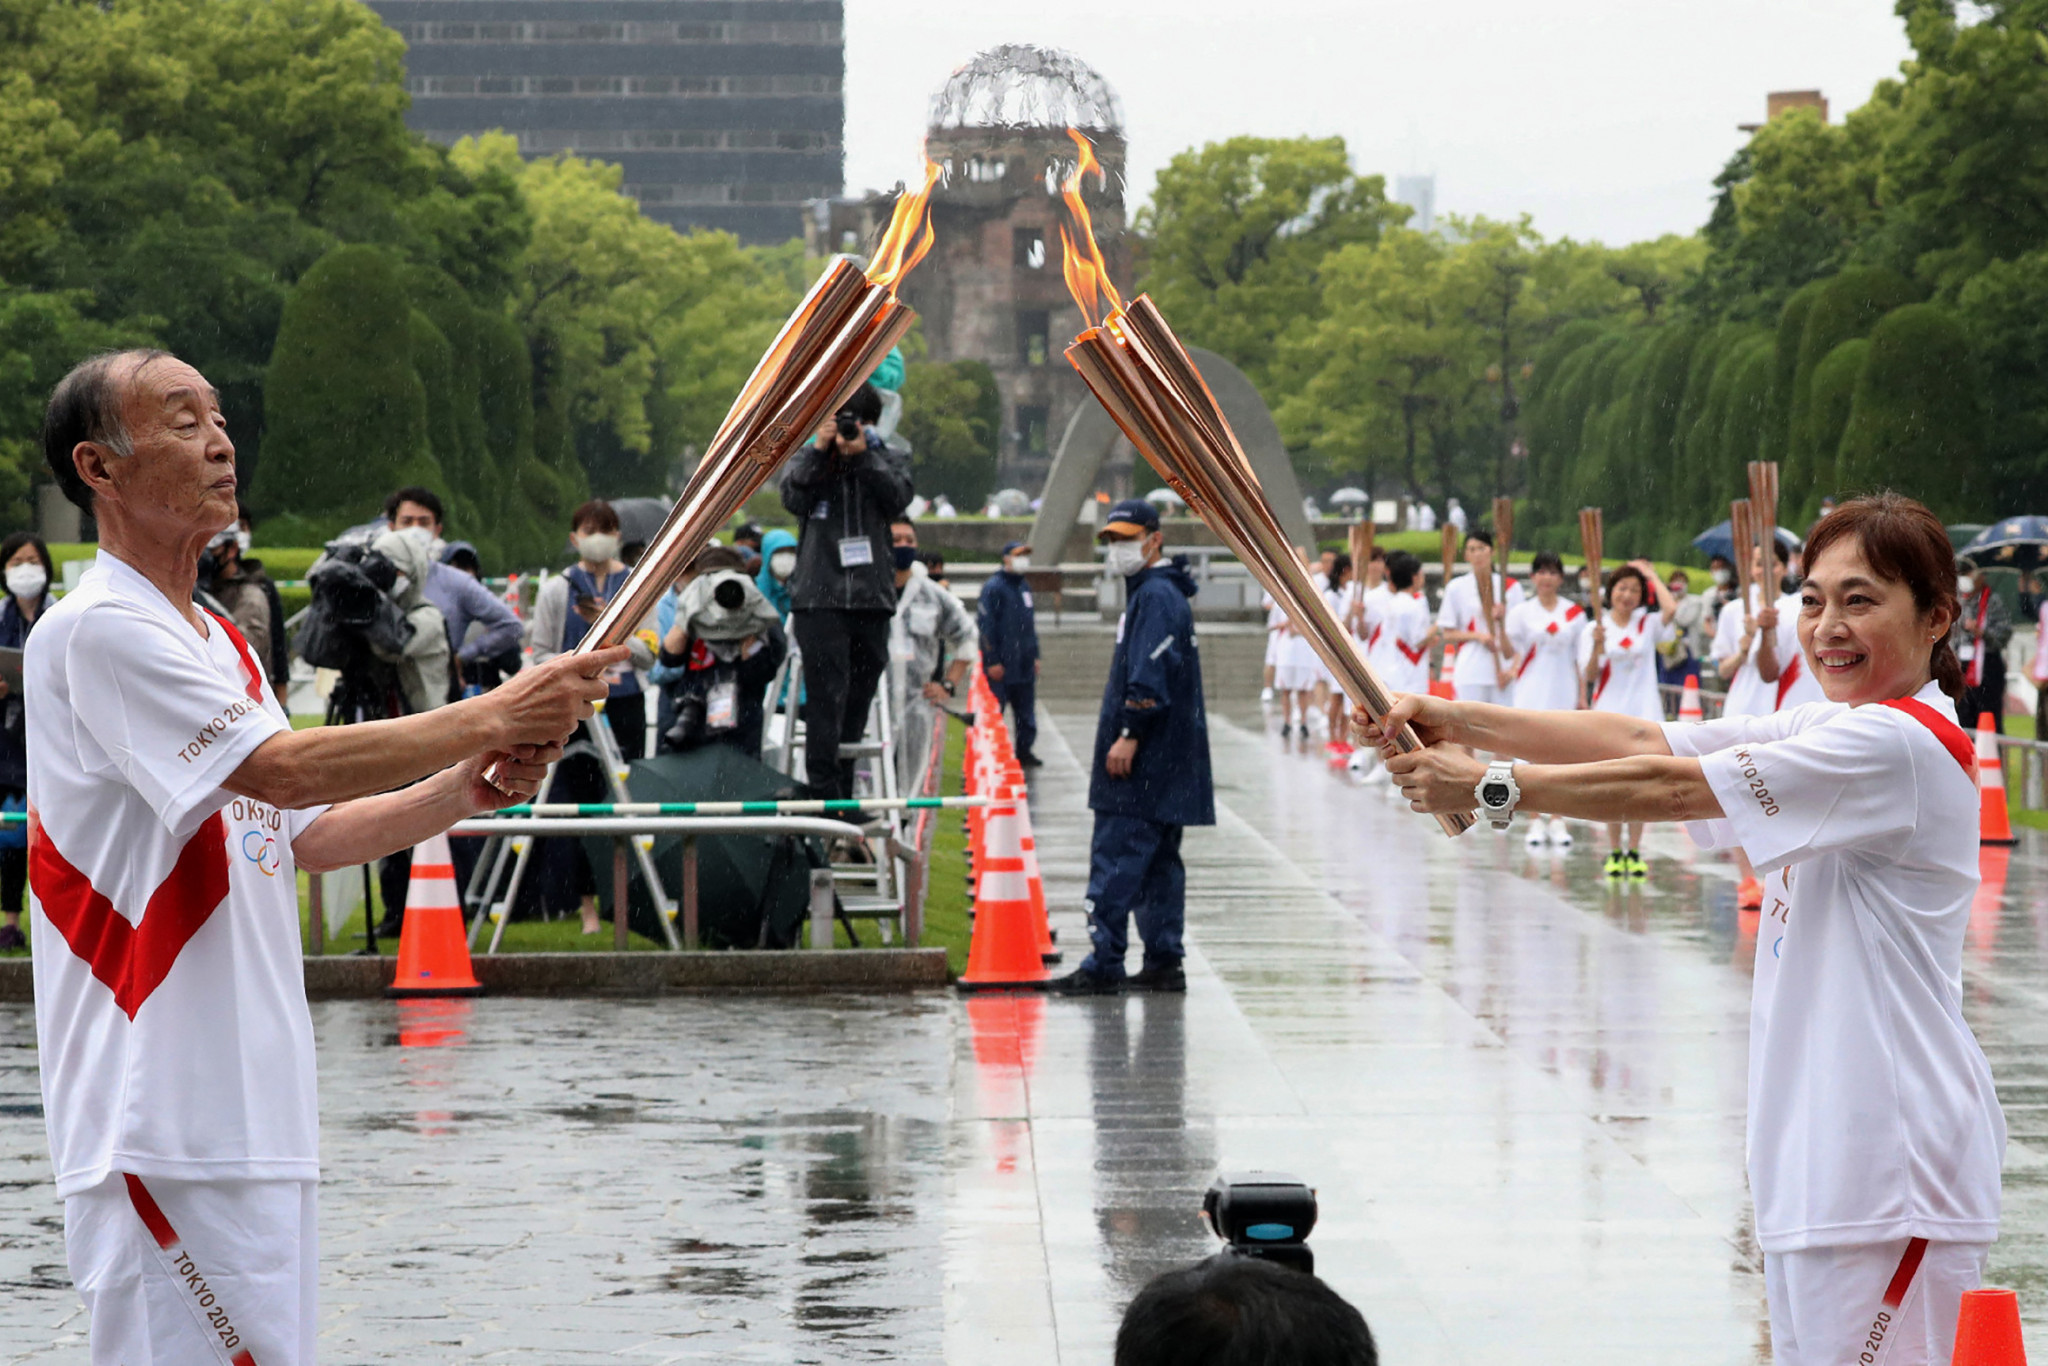 The Torch Relay began in Hiroshima ©Getty Images